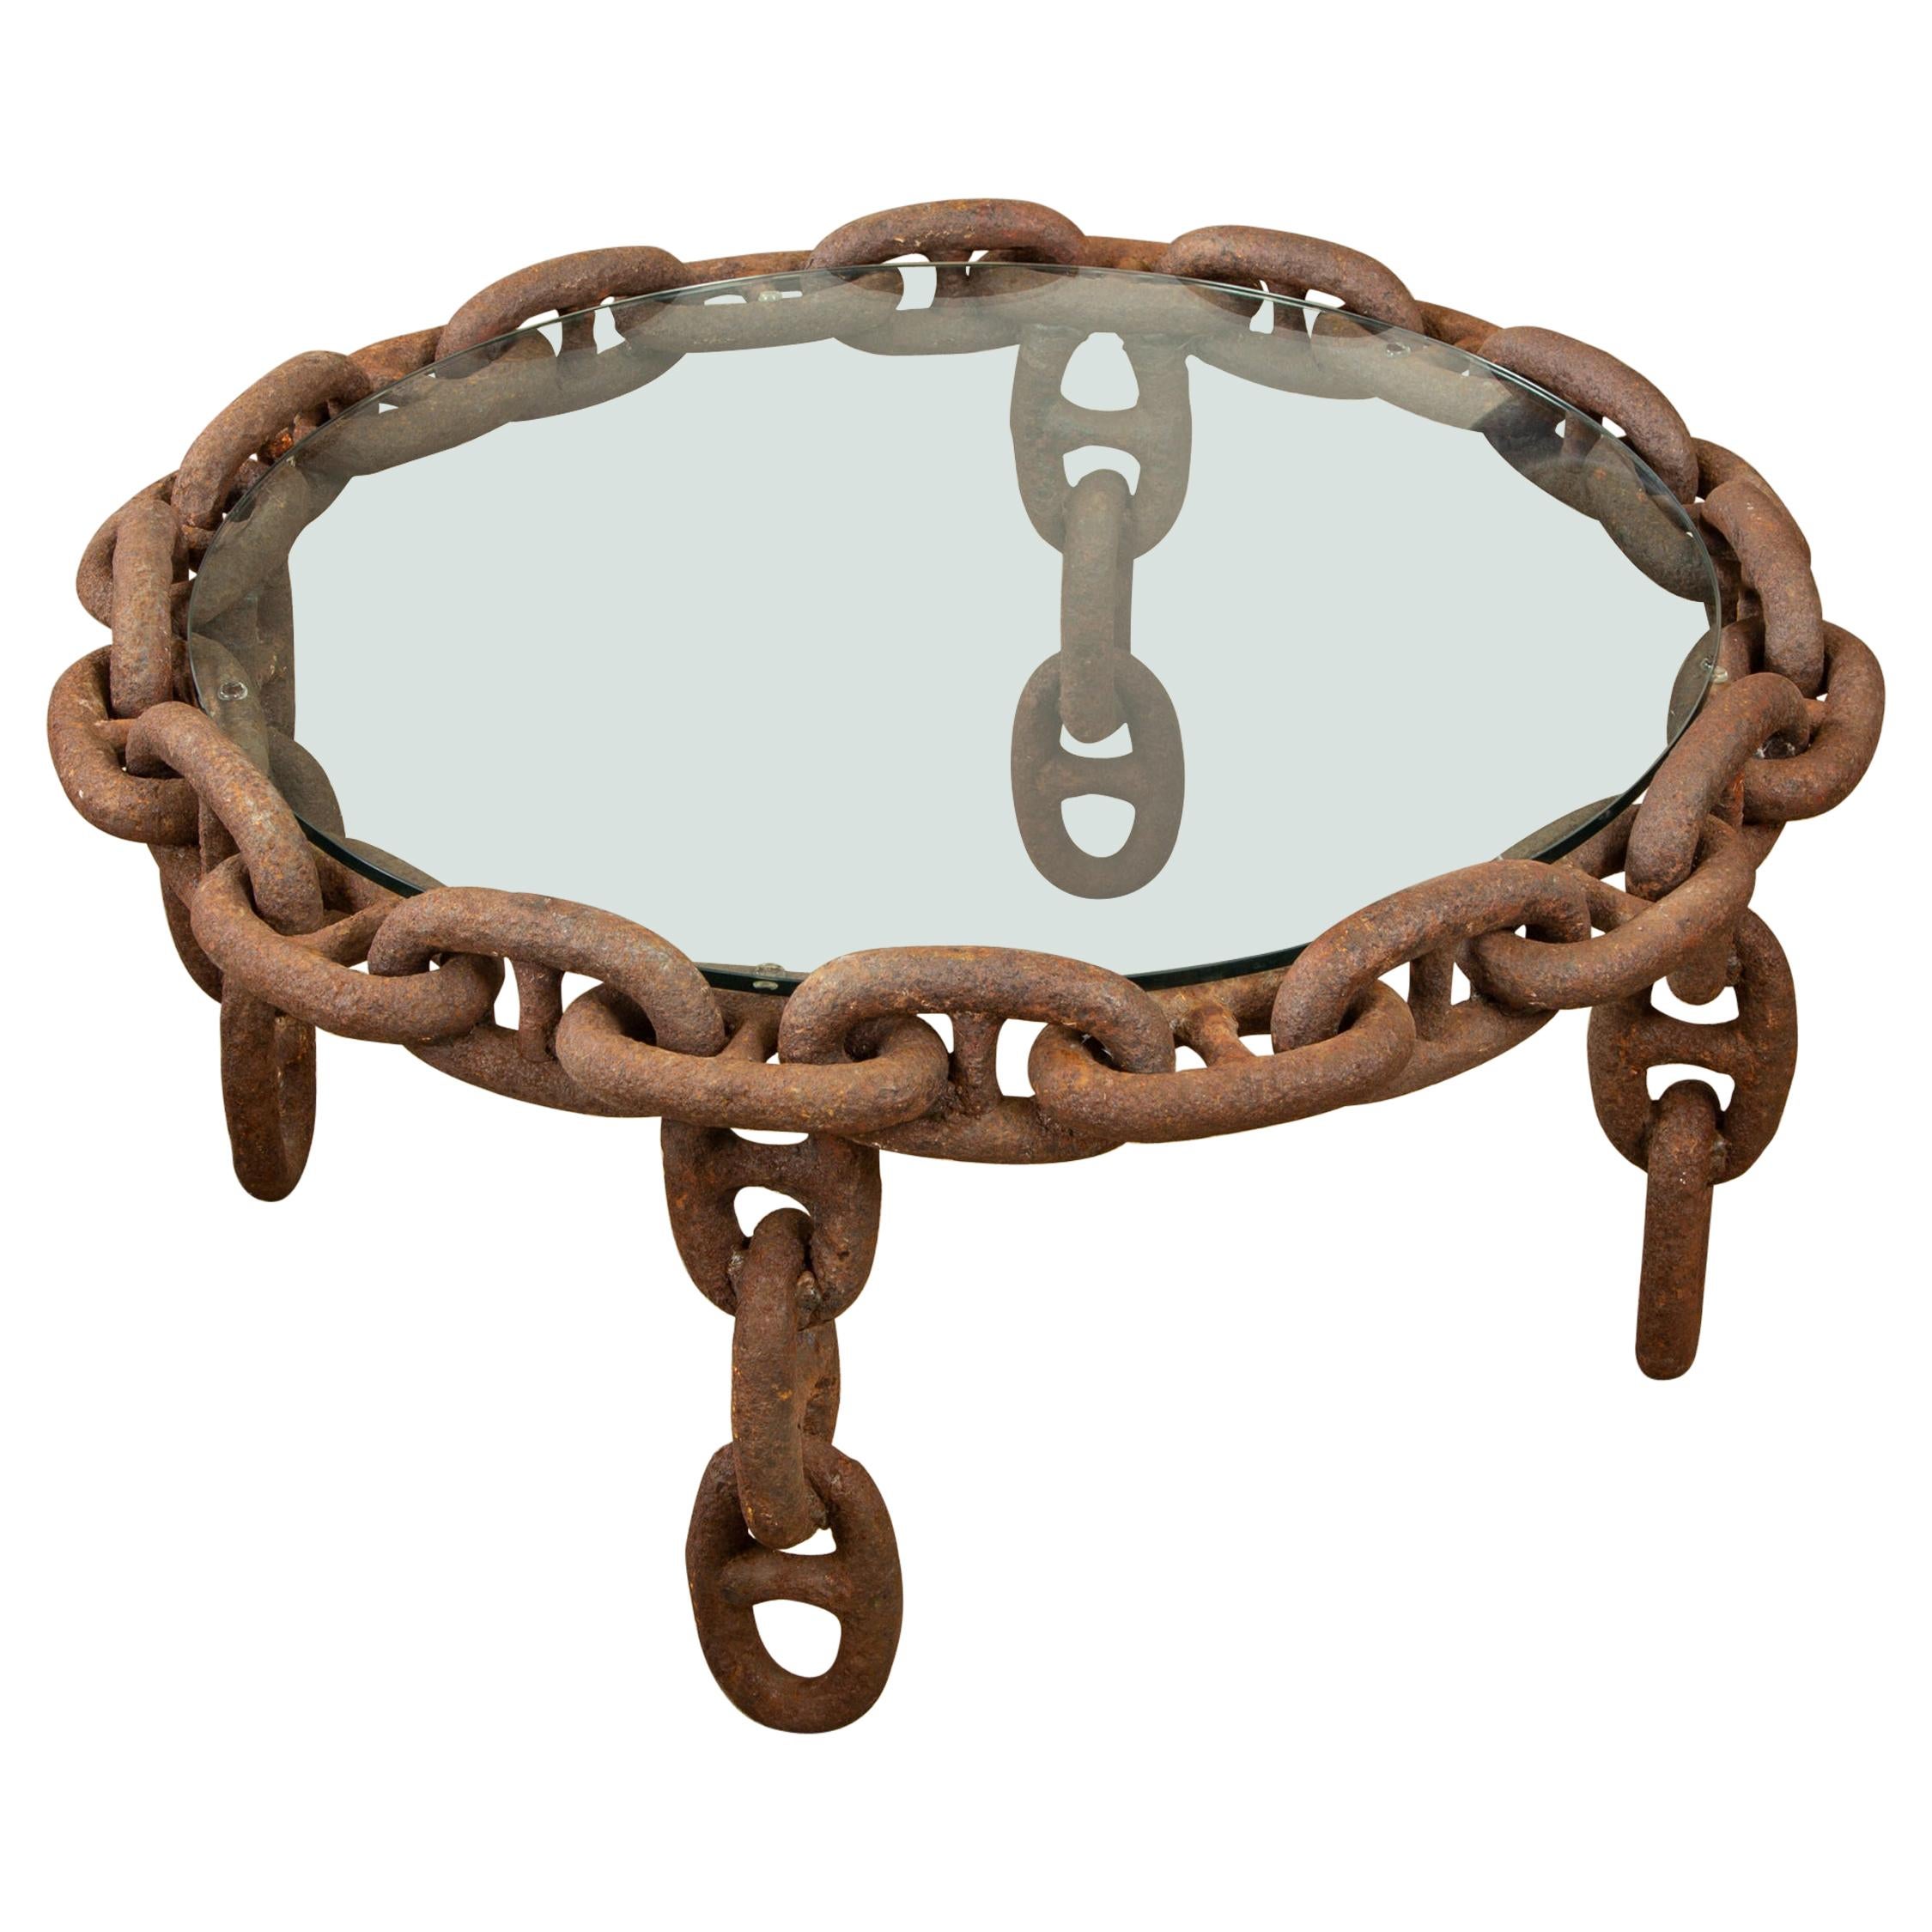 https://a.1stdibscdn.com/vintage-round-iron-chain-link-glass-coffee-table-for-sale/1121189/f_172143221576310493364/17214322_master.jpg